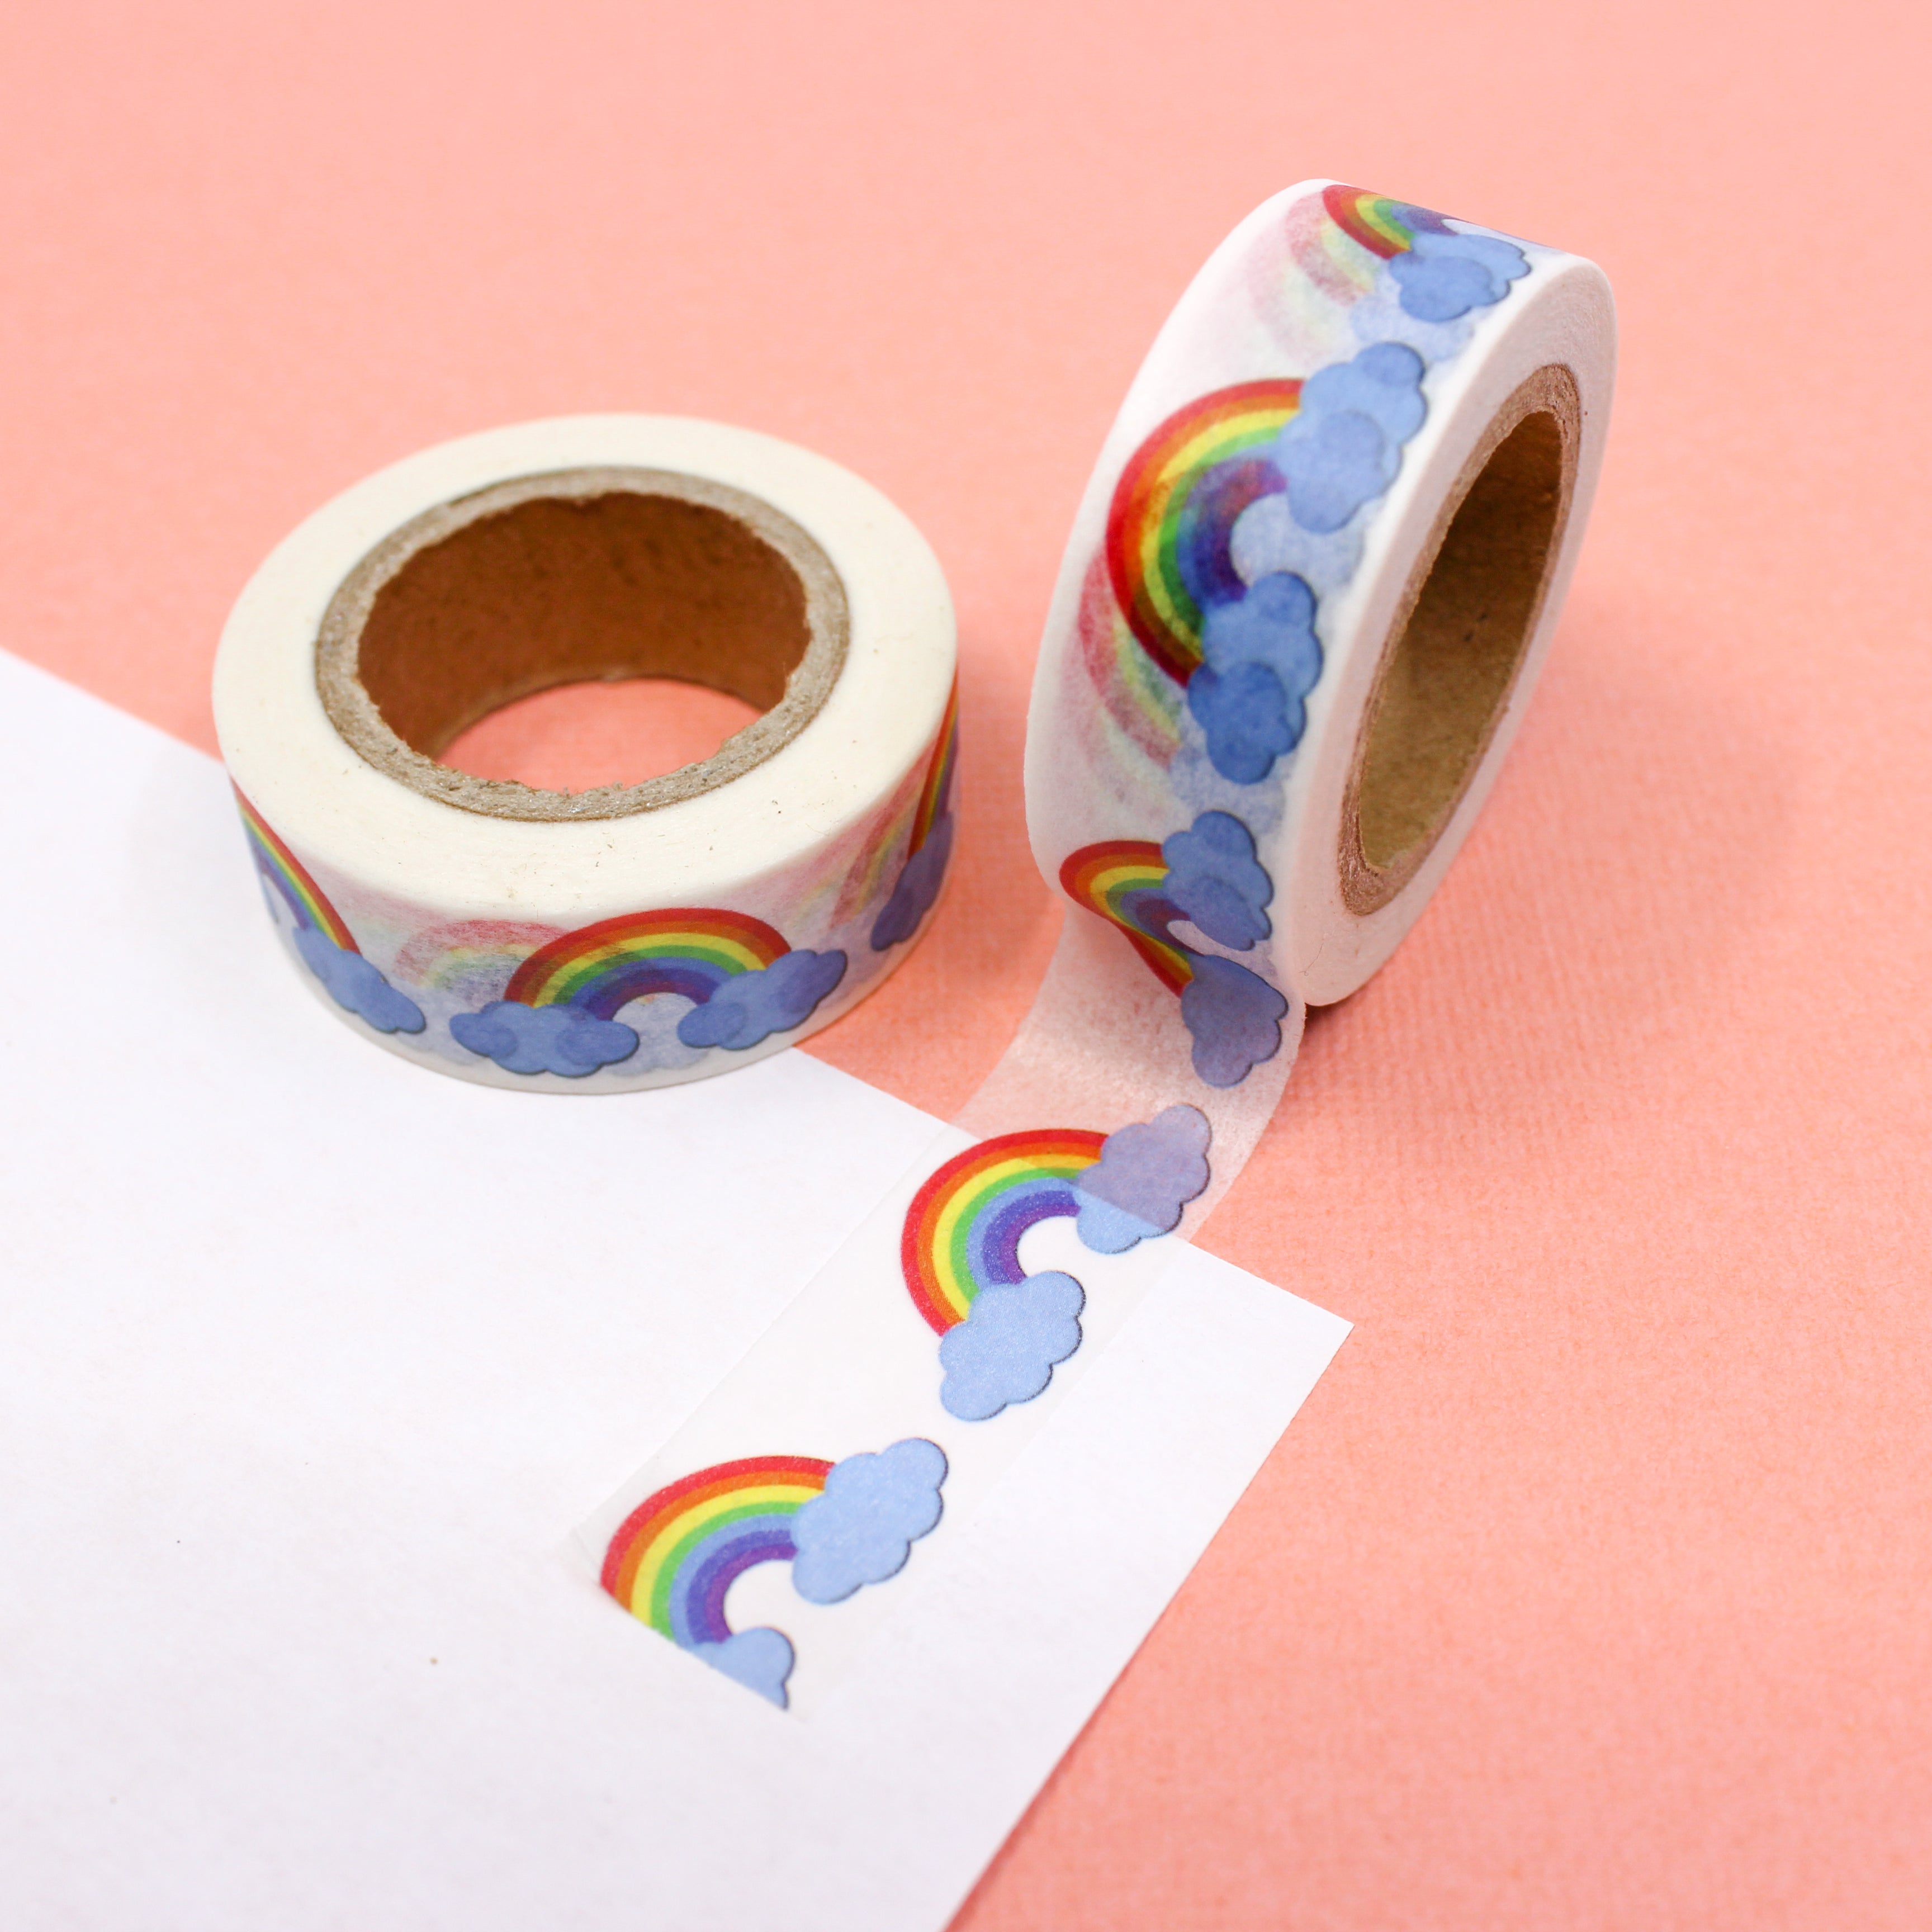 This is a rainbow patterns washi tape from BBB Supplies Craft Shop